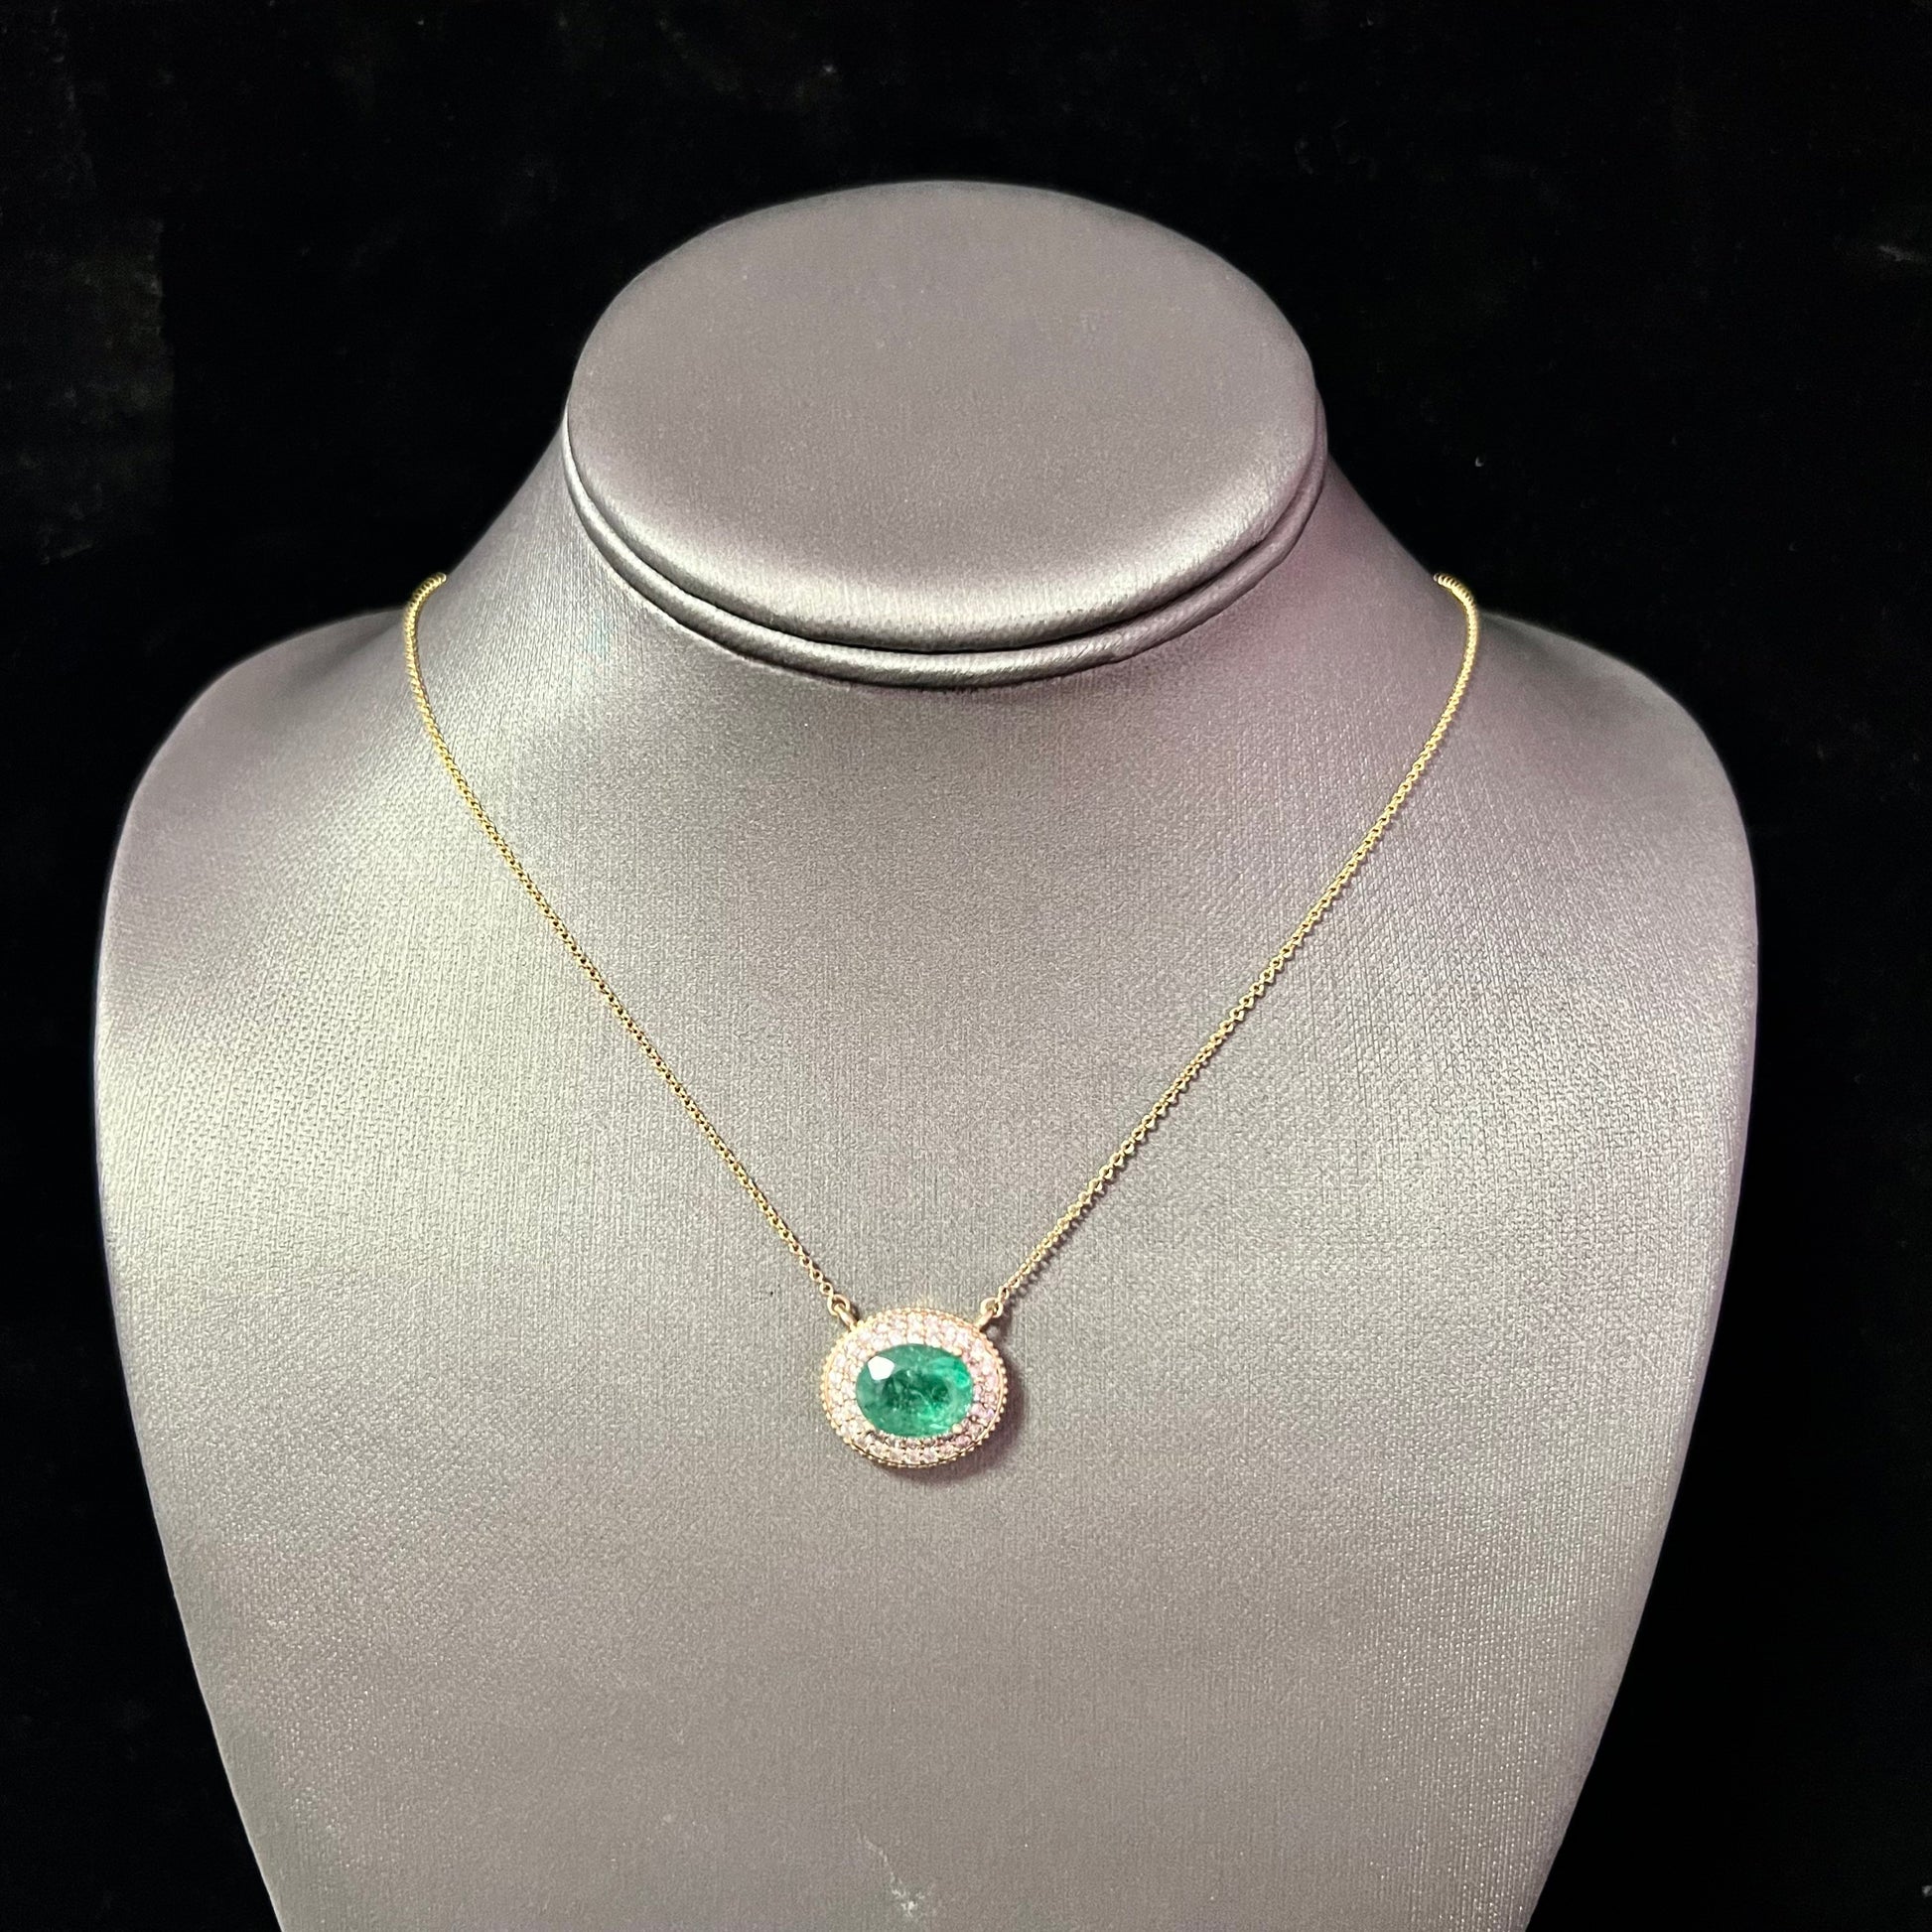 Natural Emerald Diamond Necklace 18" 14k Gold 6.29 TCW Certified $6,950 213253